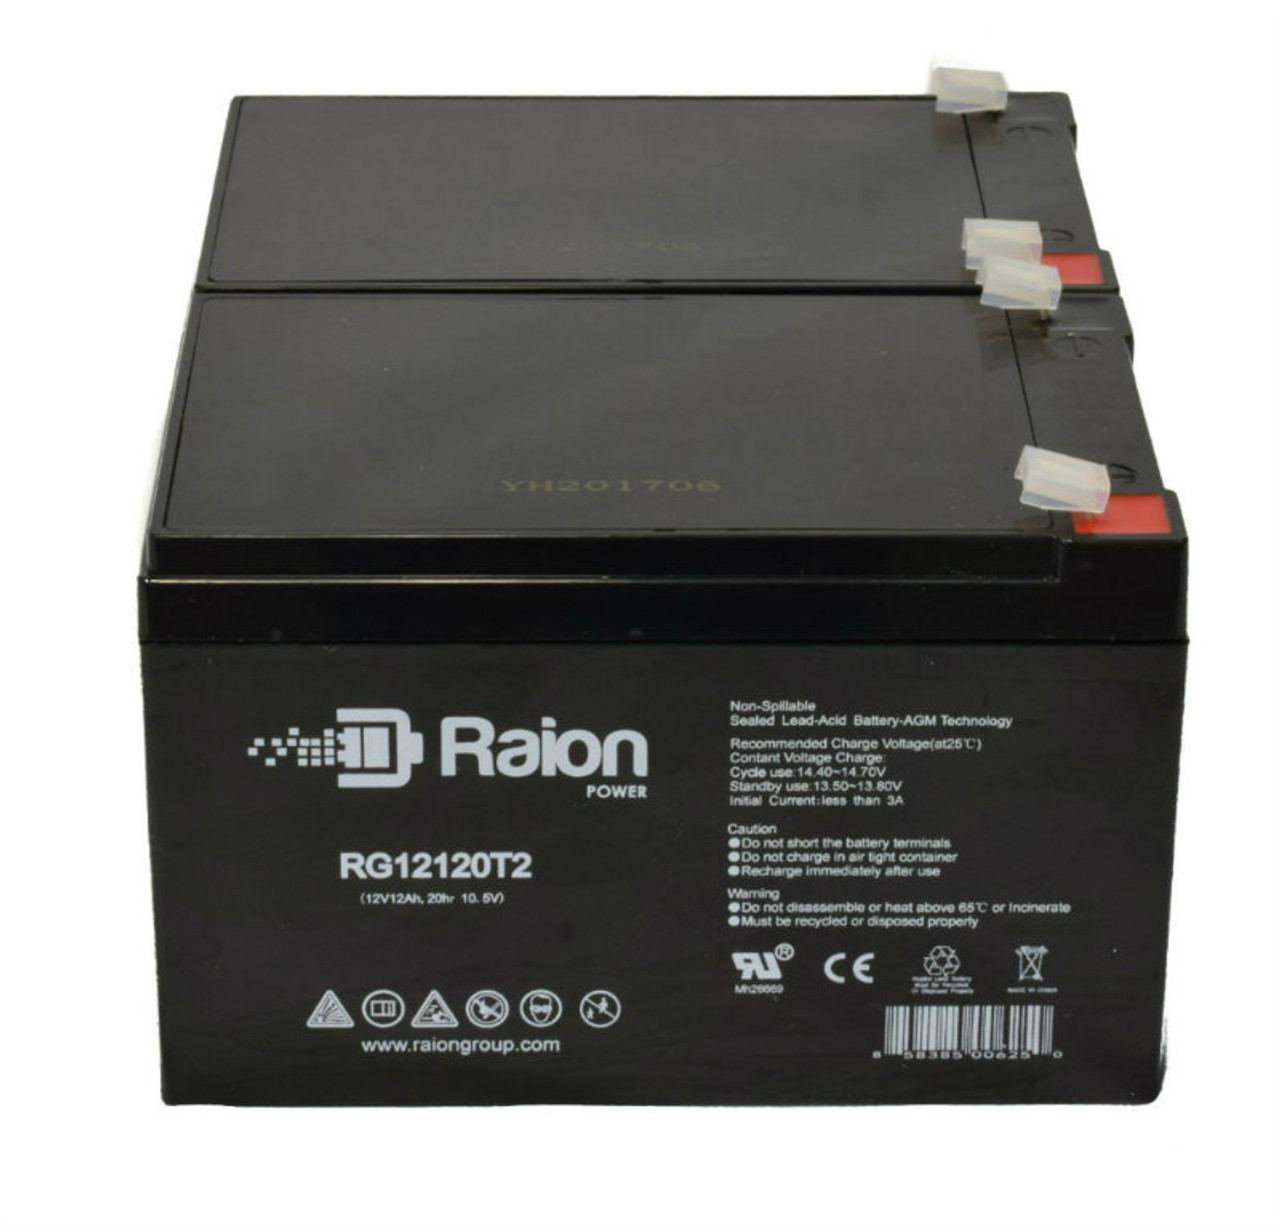 Raion Power 12V 12Ah Replacement Alarm Security System Battery for Altronix AL802ULADAJ - 2 Pack